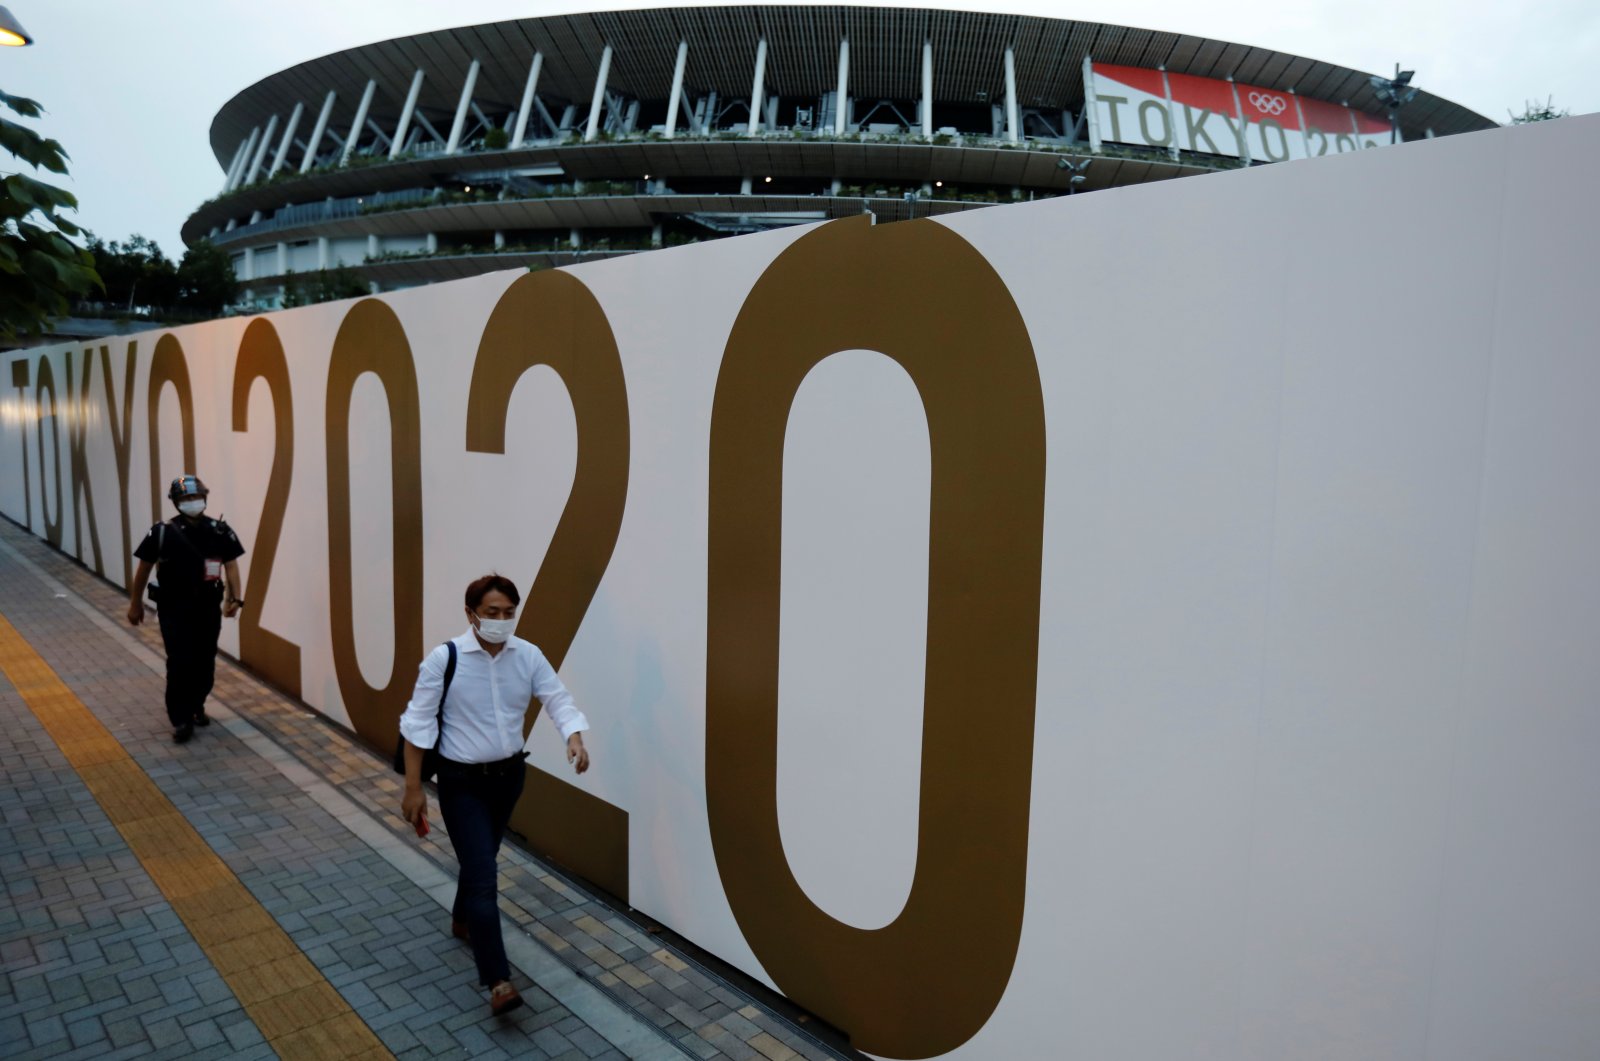 Pedestrians wearing protective masks against COVID-19 walk in front of the National Stadium, the main venue of the Tokyo 2020 Olympics and Paralympics, Tokyo, Japan, July 7, 2021. (Reuters Photo)